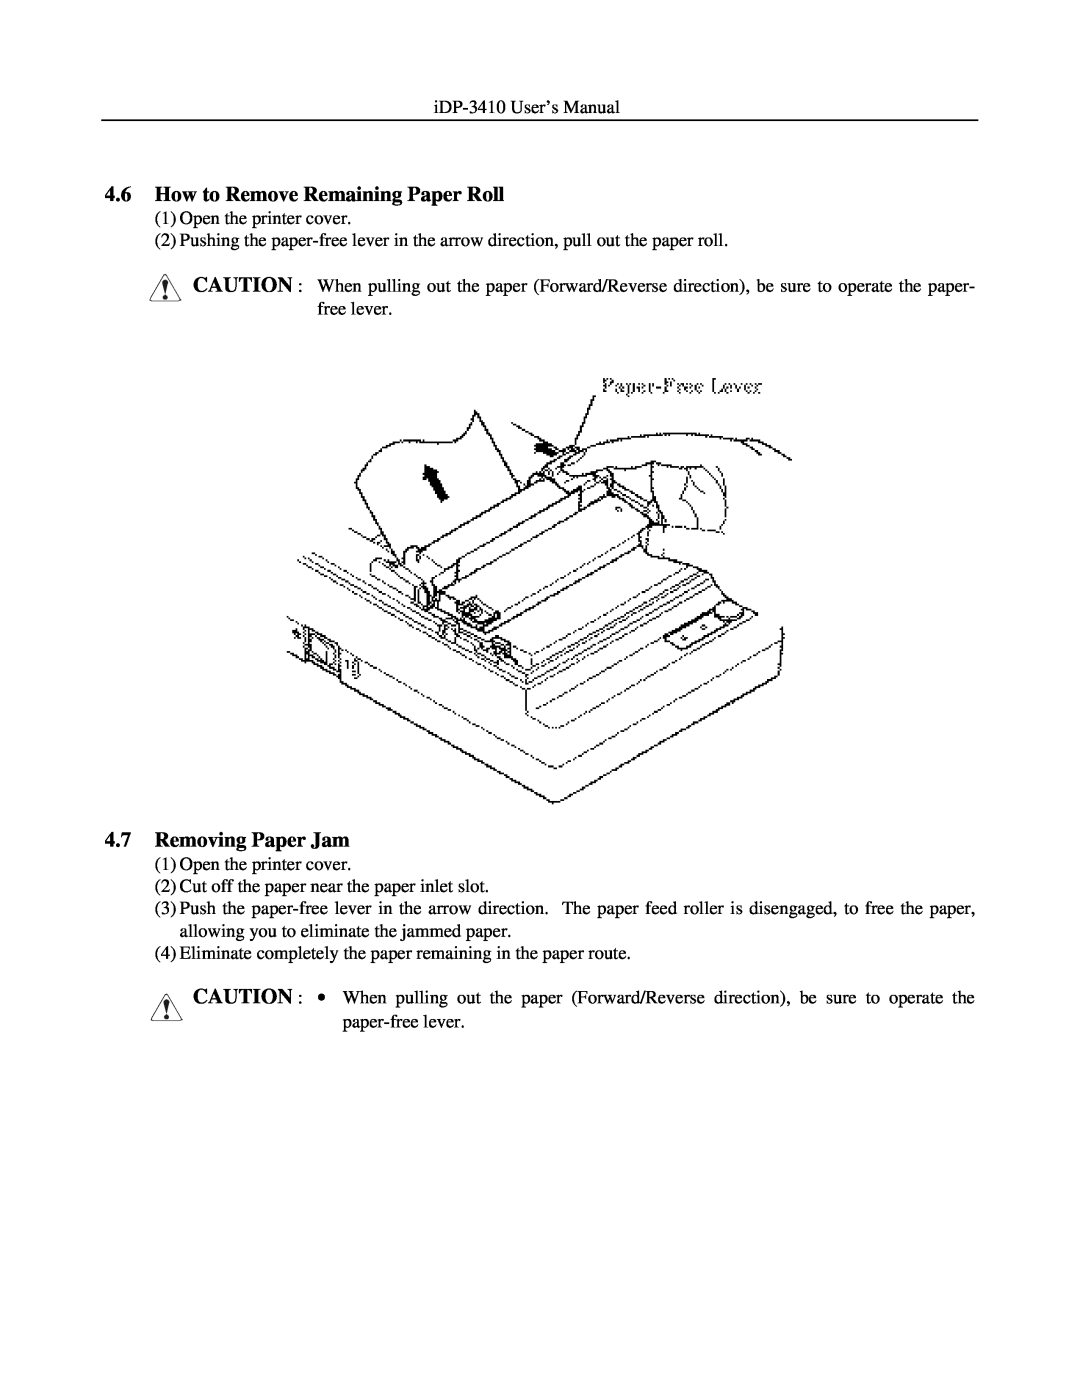 Addlogix iDP-3410 user manual How to Remove Remaining Paper Roll, Removing Paper Jam 